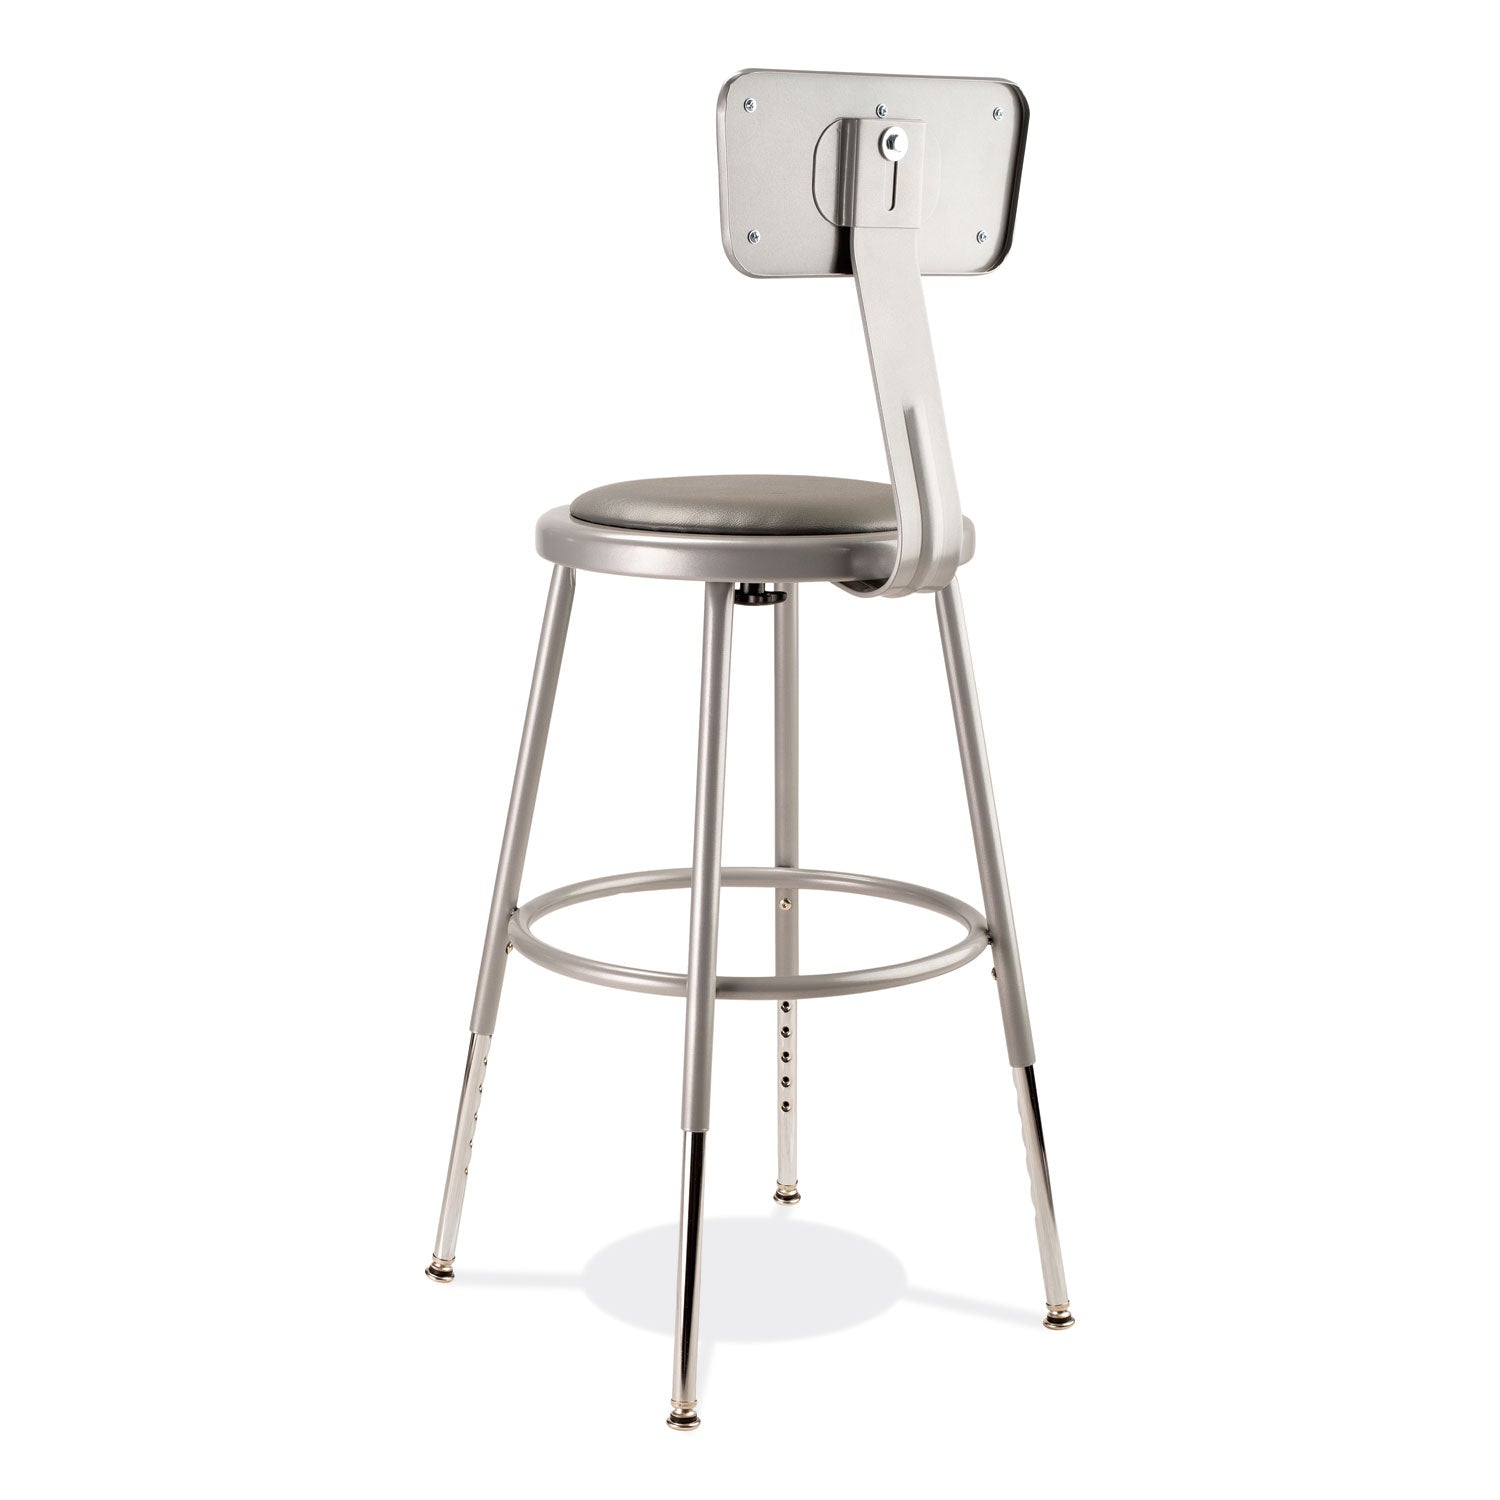 6400-series-height-adjustable-heavy-duty-padded-stool-w-backrest-supports-300lb-19-27-seat-ht-grayships-in-1-3-bus-days_nps6418hb - 3